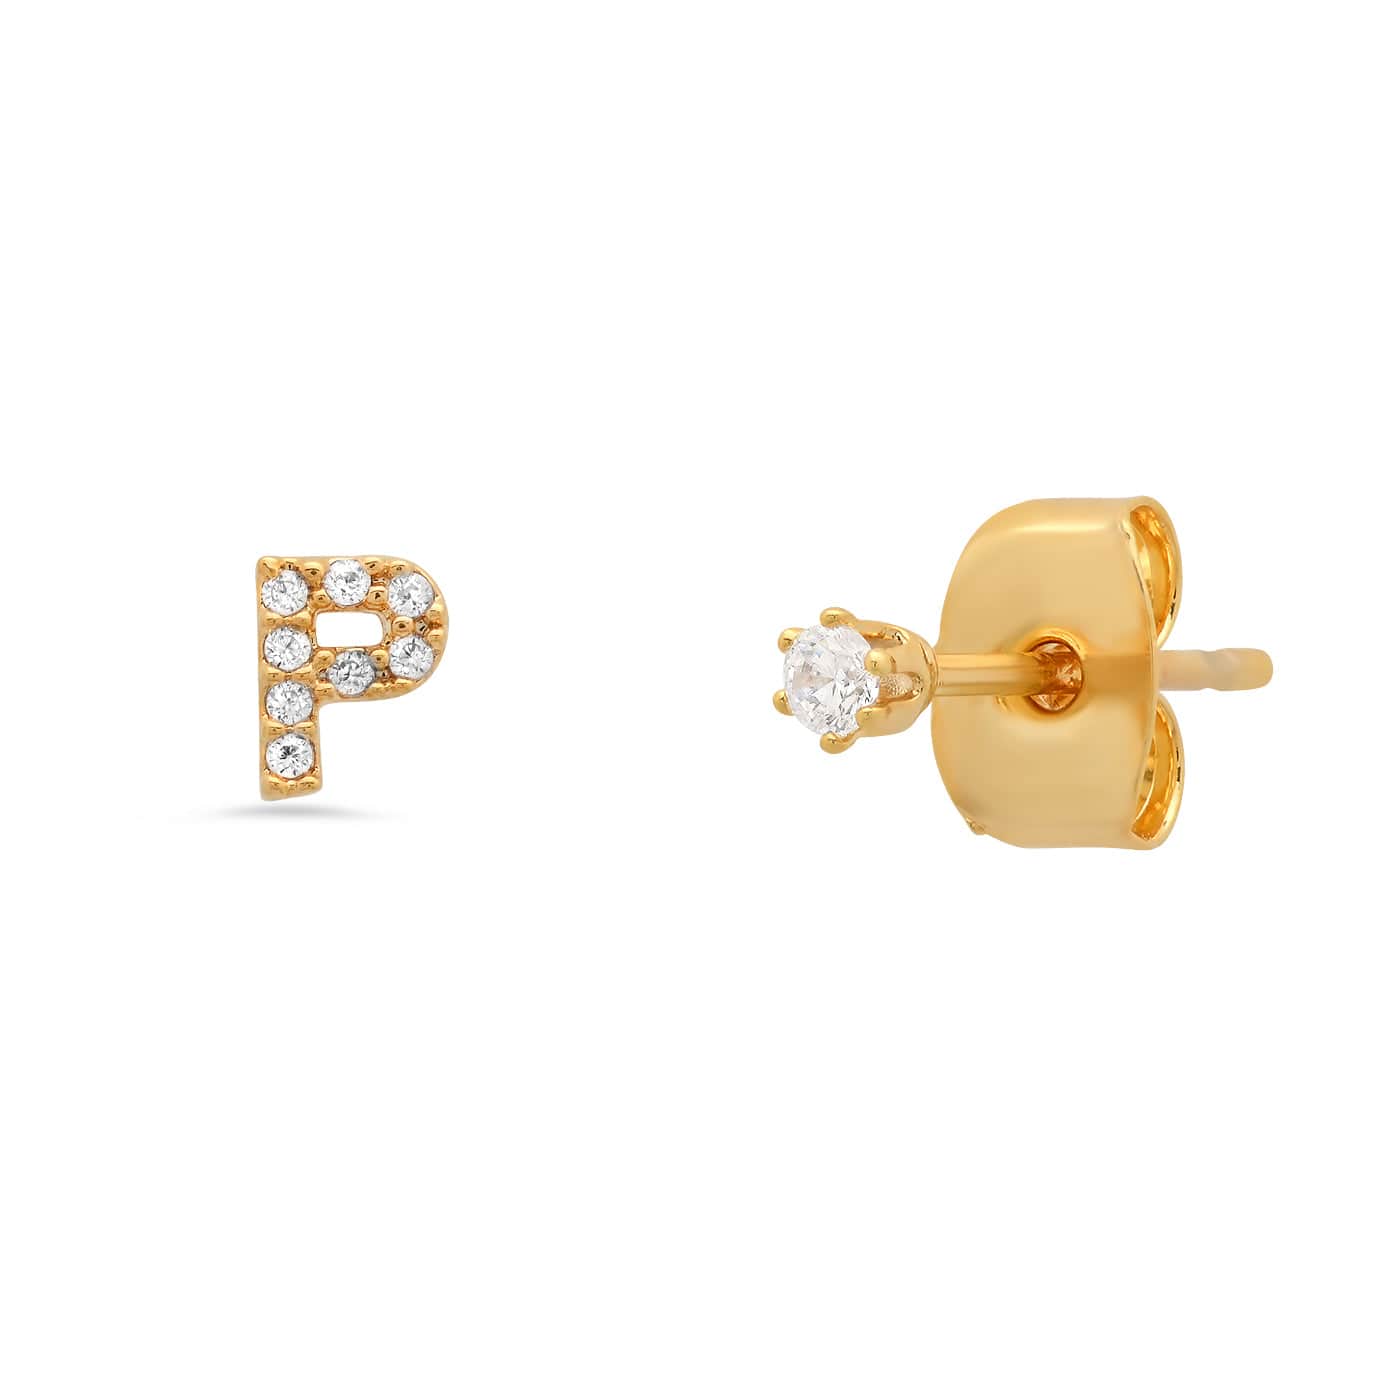 TAI JEWELRY Earrings P Pavé Initial Mismatched Earrings